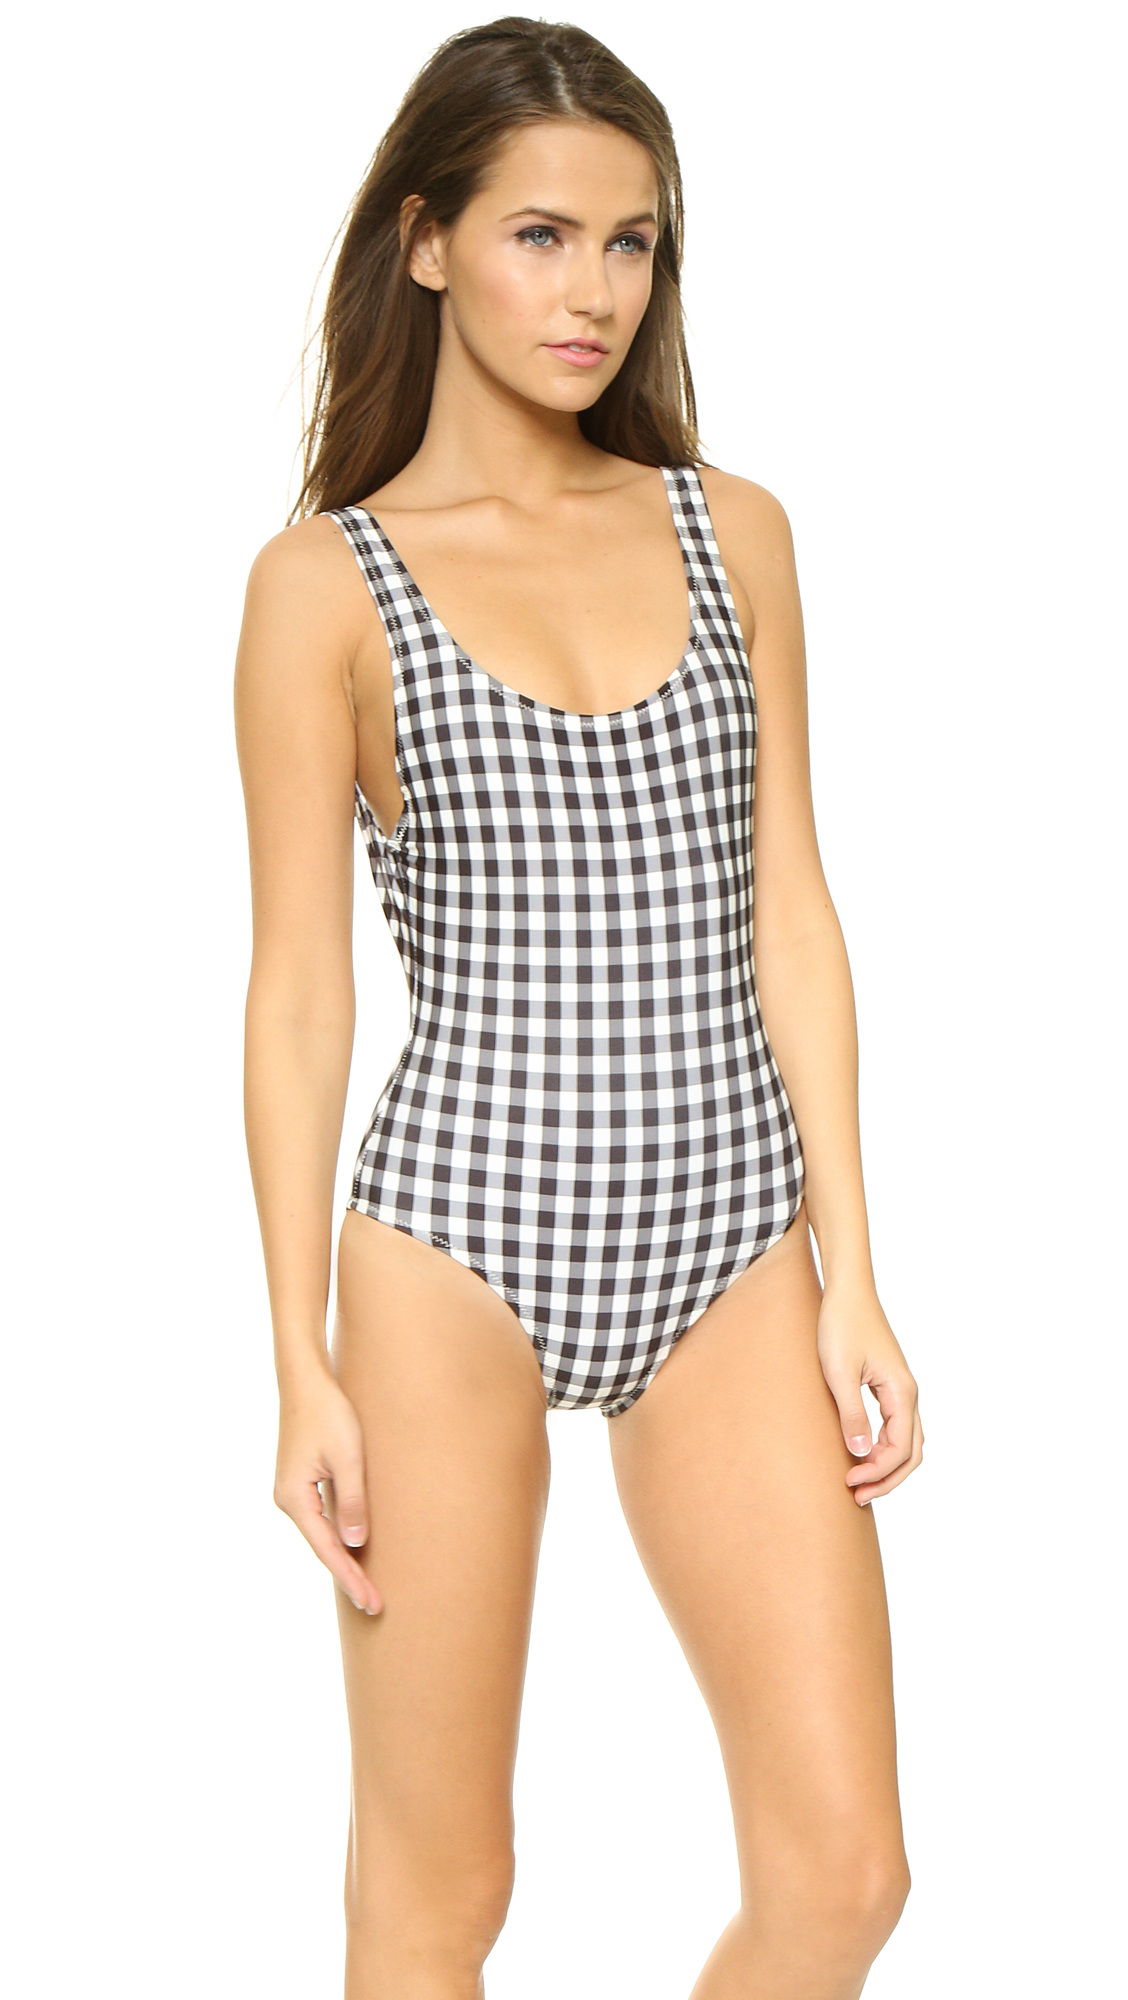 Black and white striped swimsuit